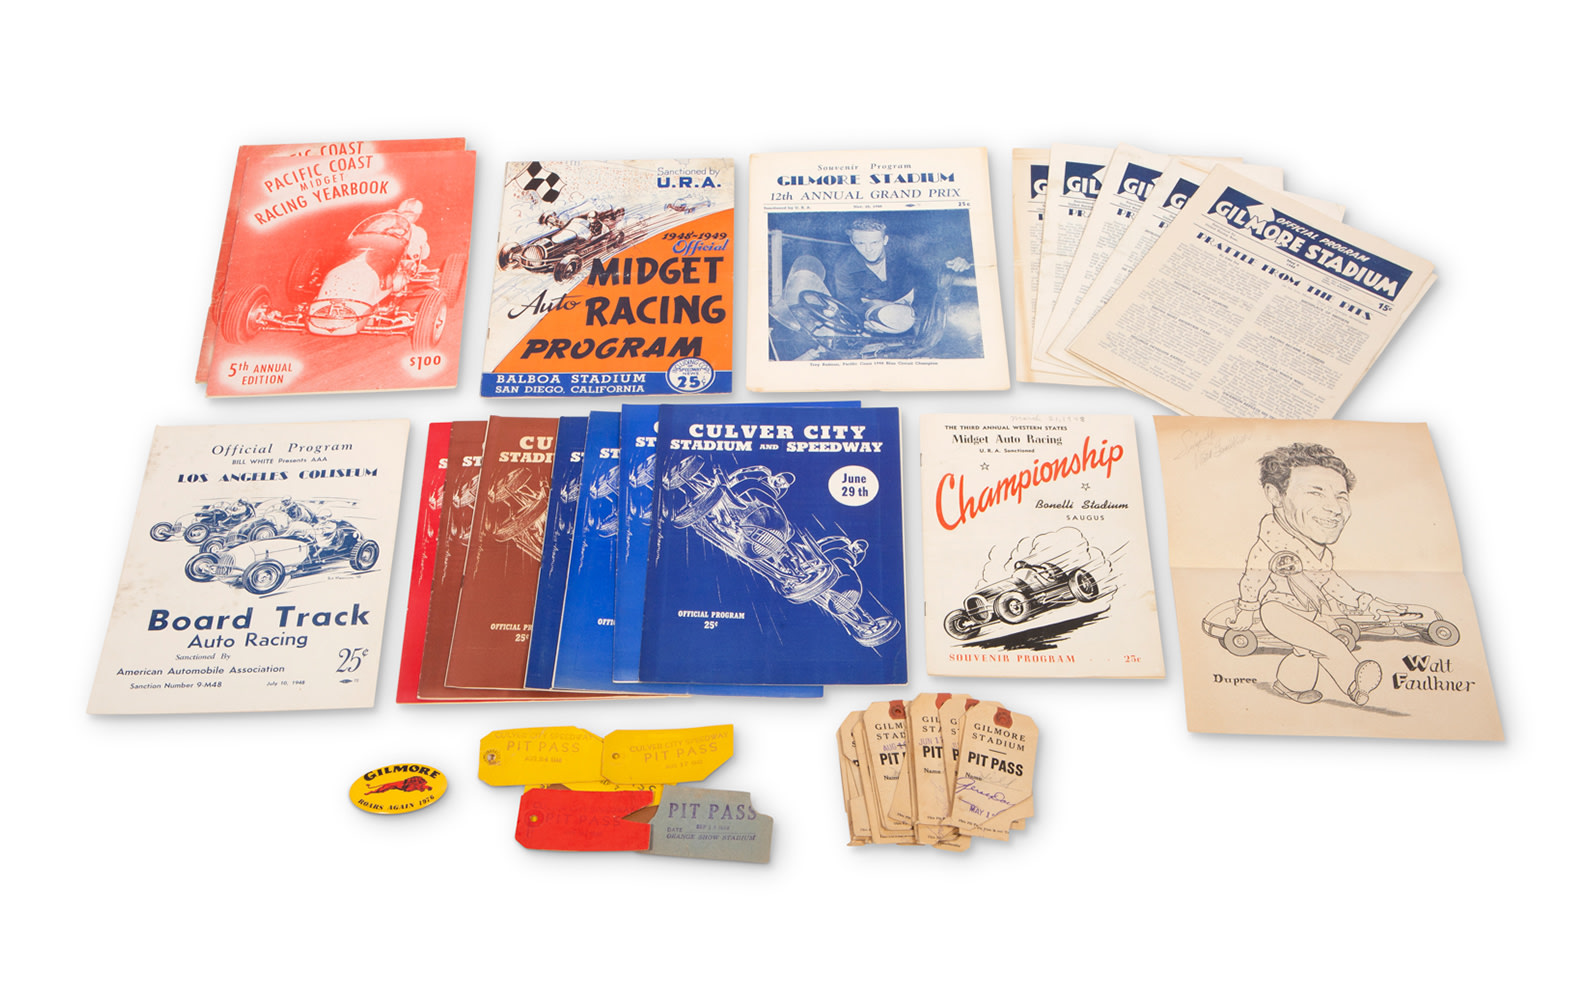 1948 Midget Racing Programs, Yearbooks, and Pit Passes